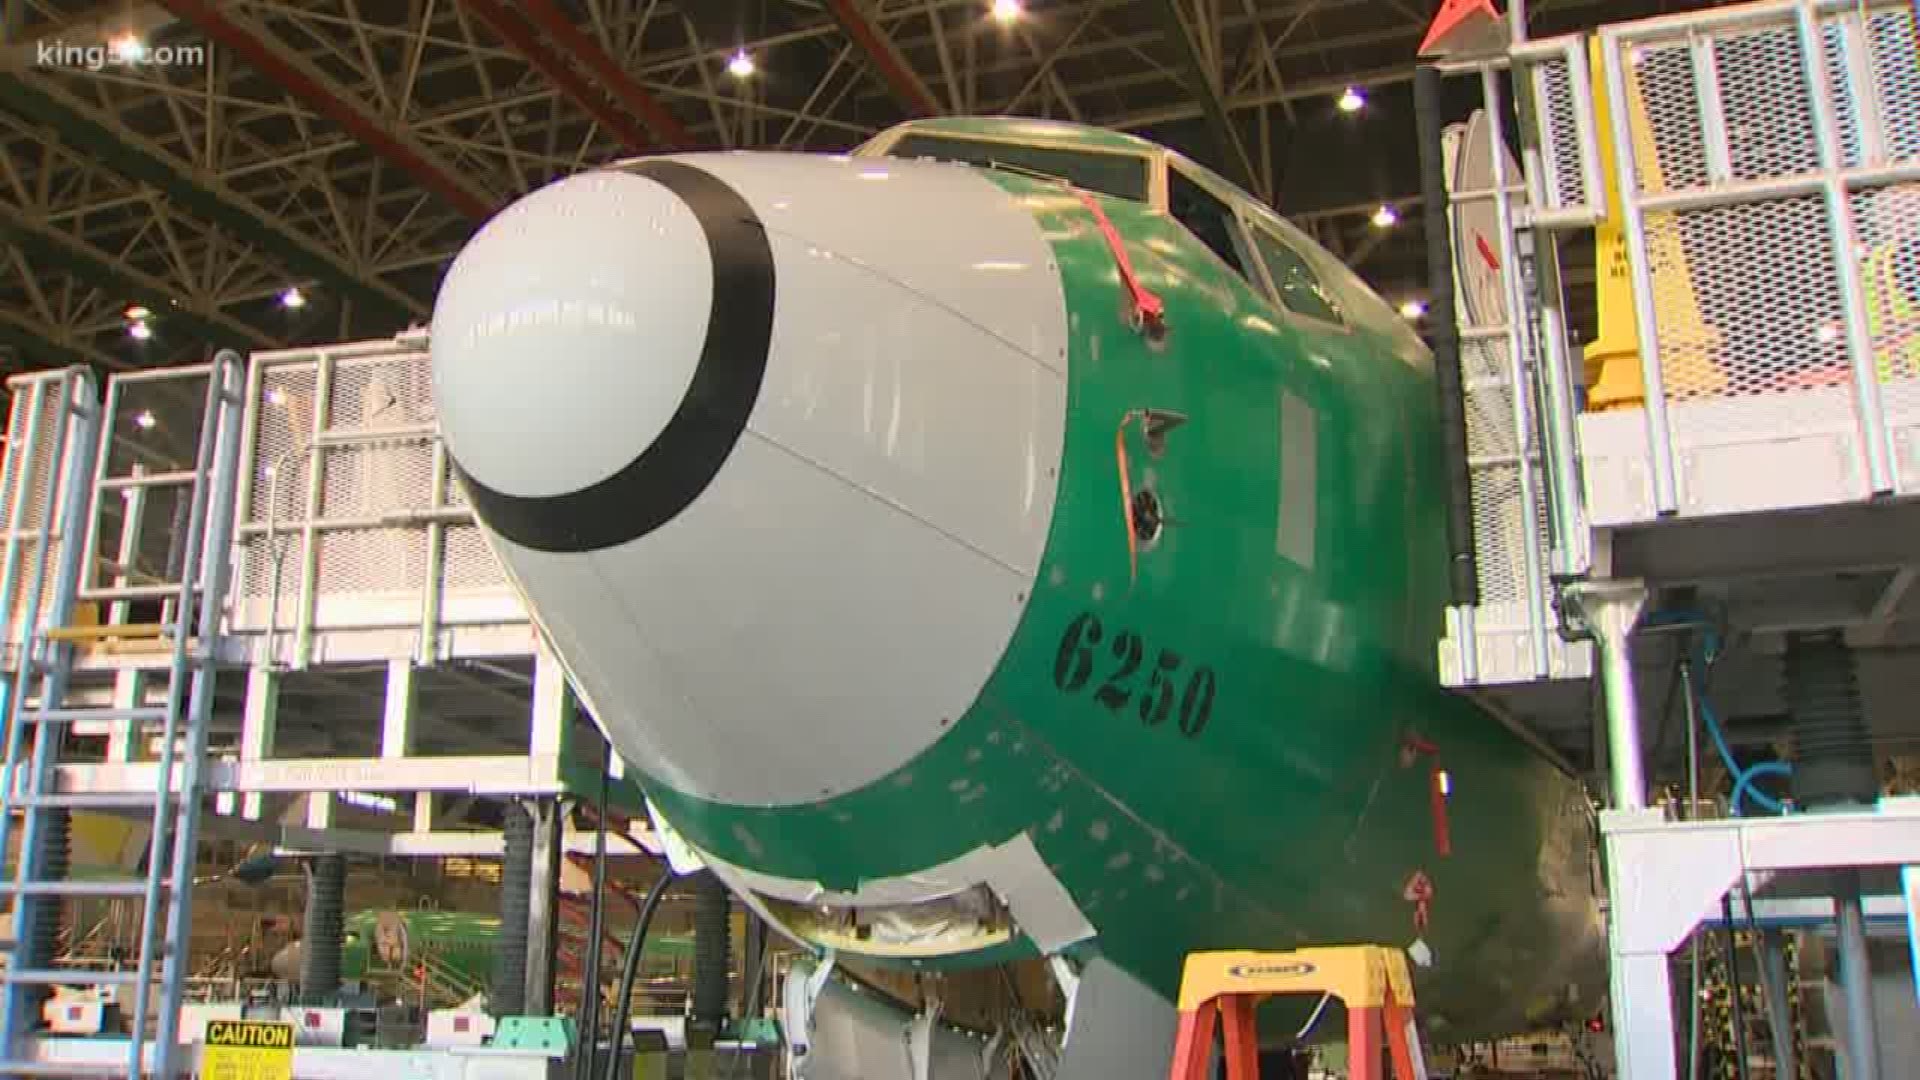 A special panel is being convened by the U.S. Department of Transportation to review how the FAA certifies planes. This is just the latest in what promises to be a busy week in the grounding of the Boeing 737 MAX fleet following two fatal crashes.   KING 5's Aviation Specialist Glenn Farley tonight on what we've learned.